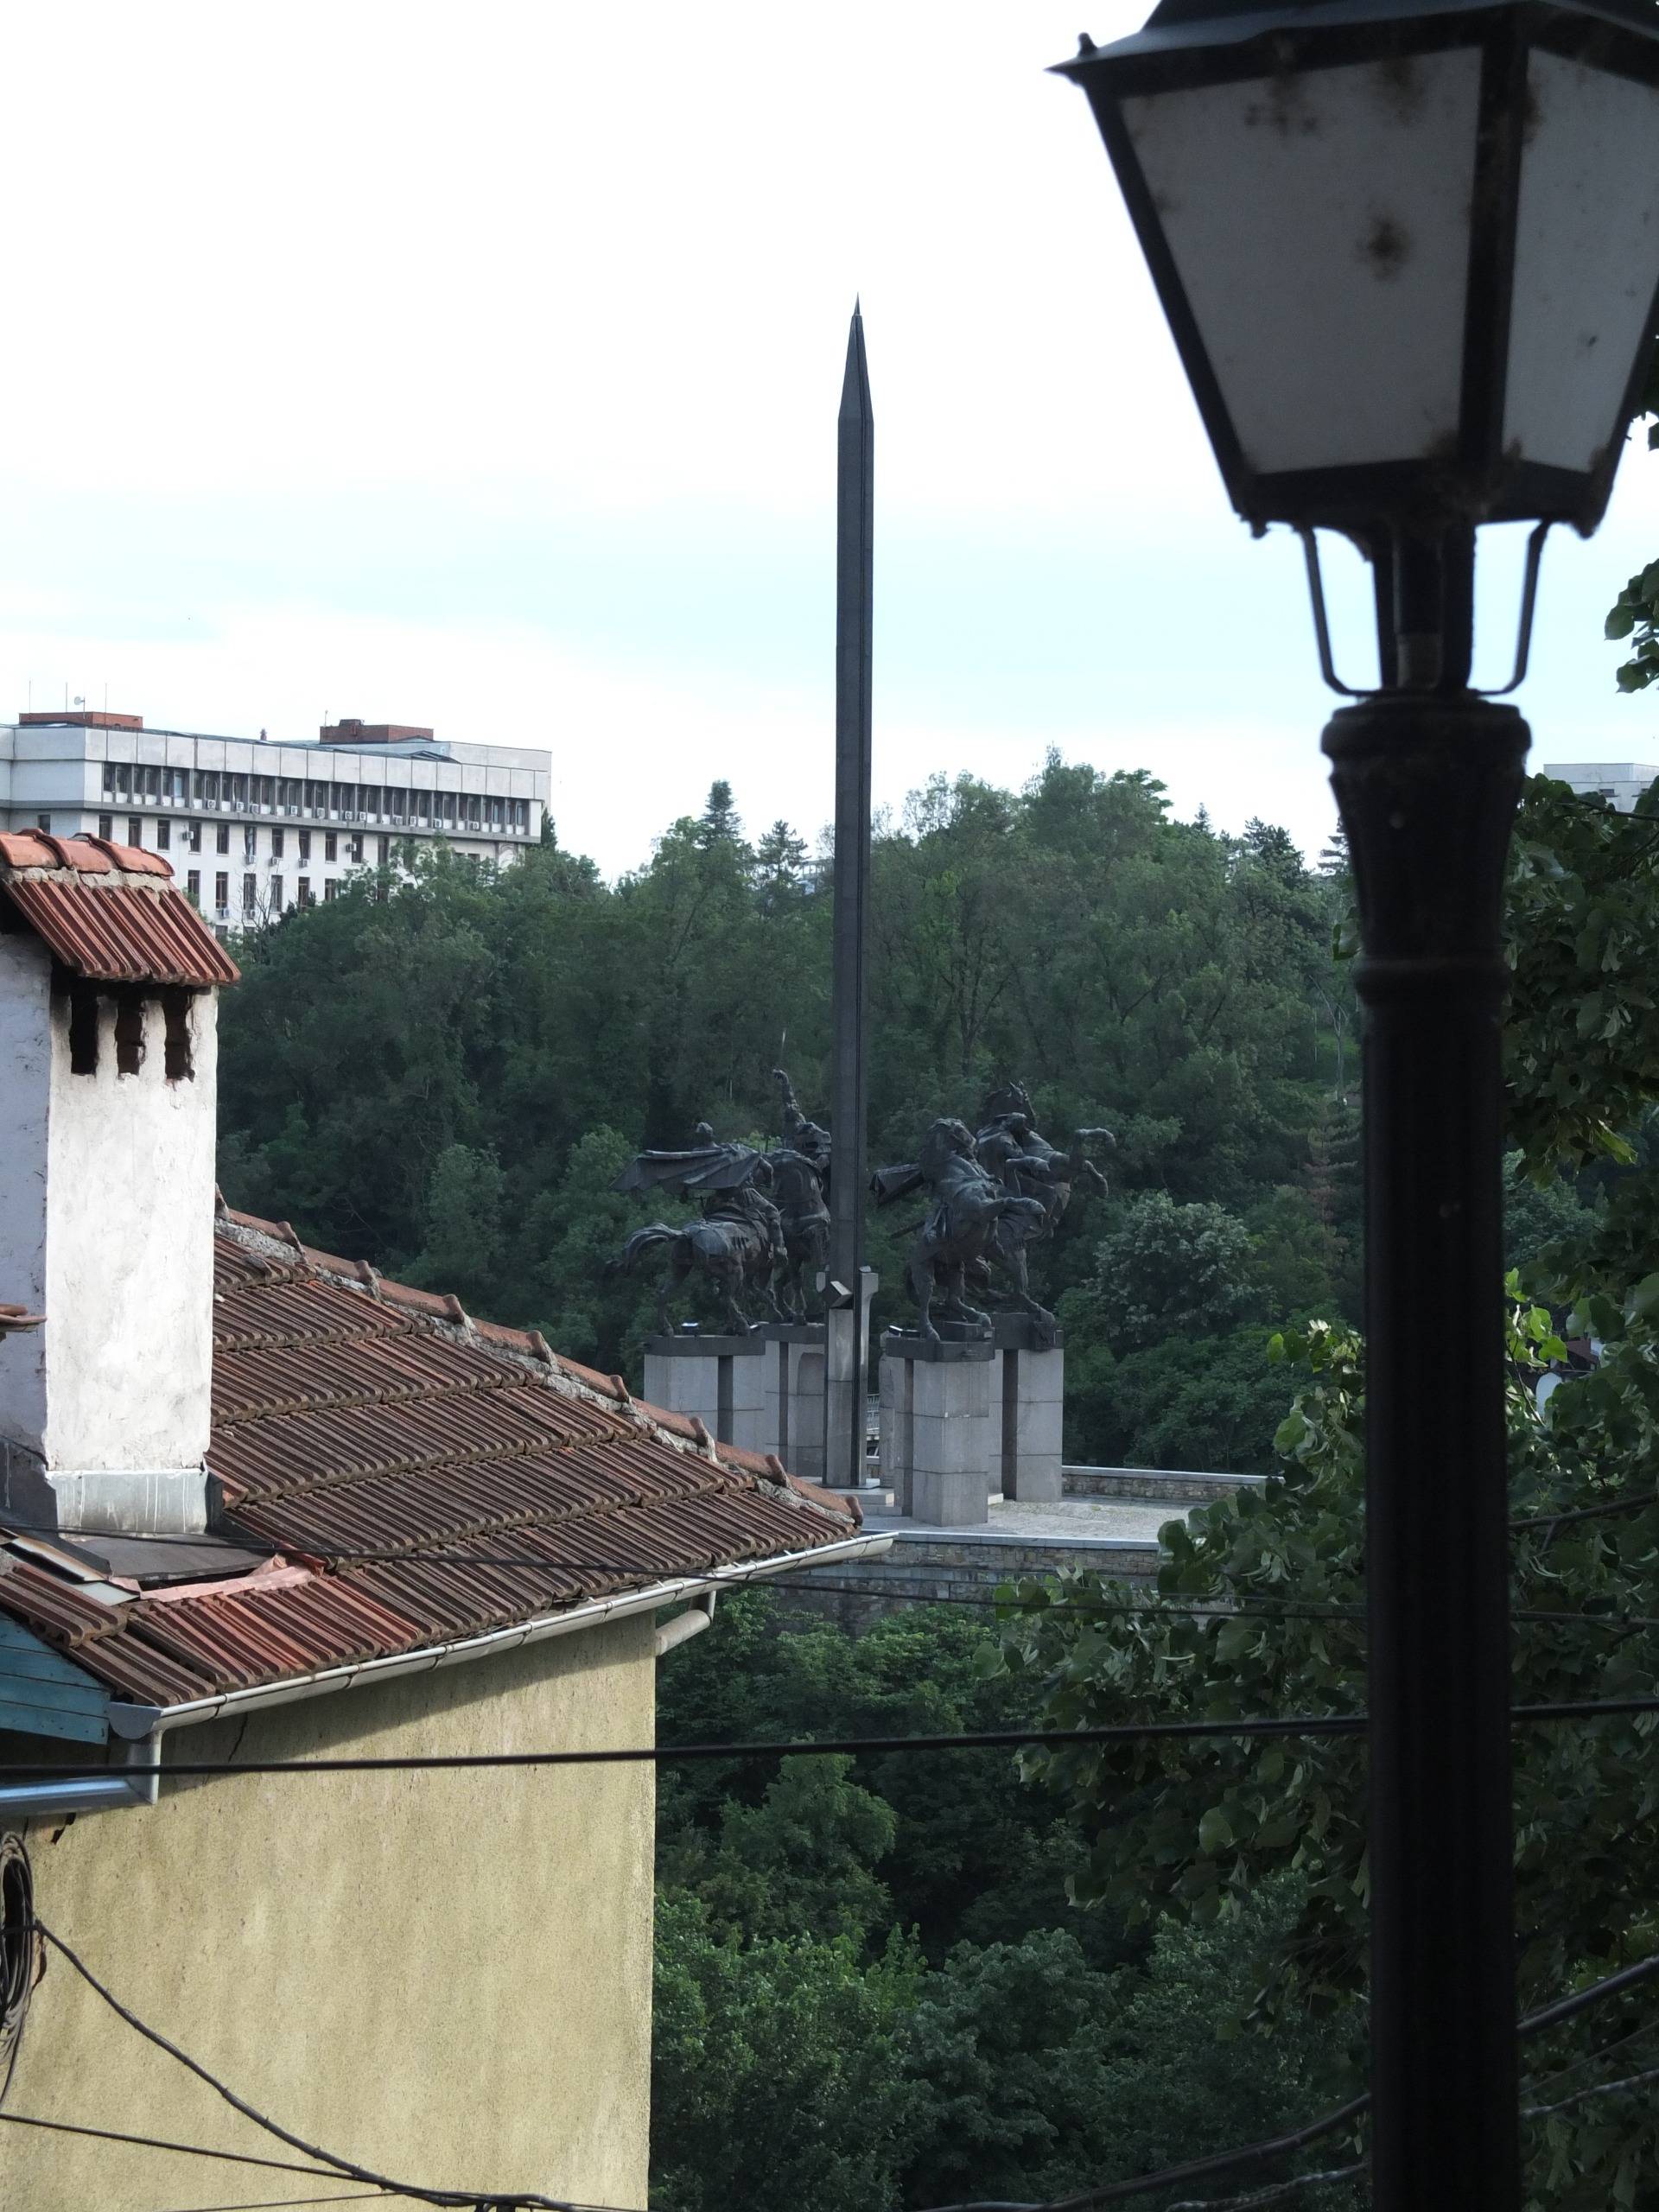 One Bulgarian town that really stands out - The Tale of the Old Capital.